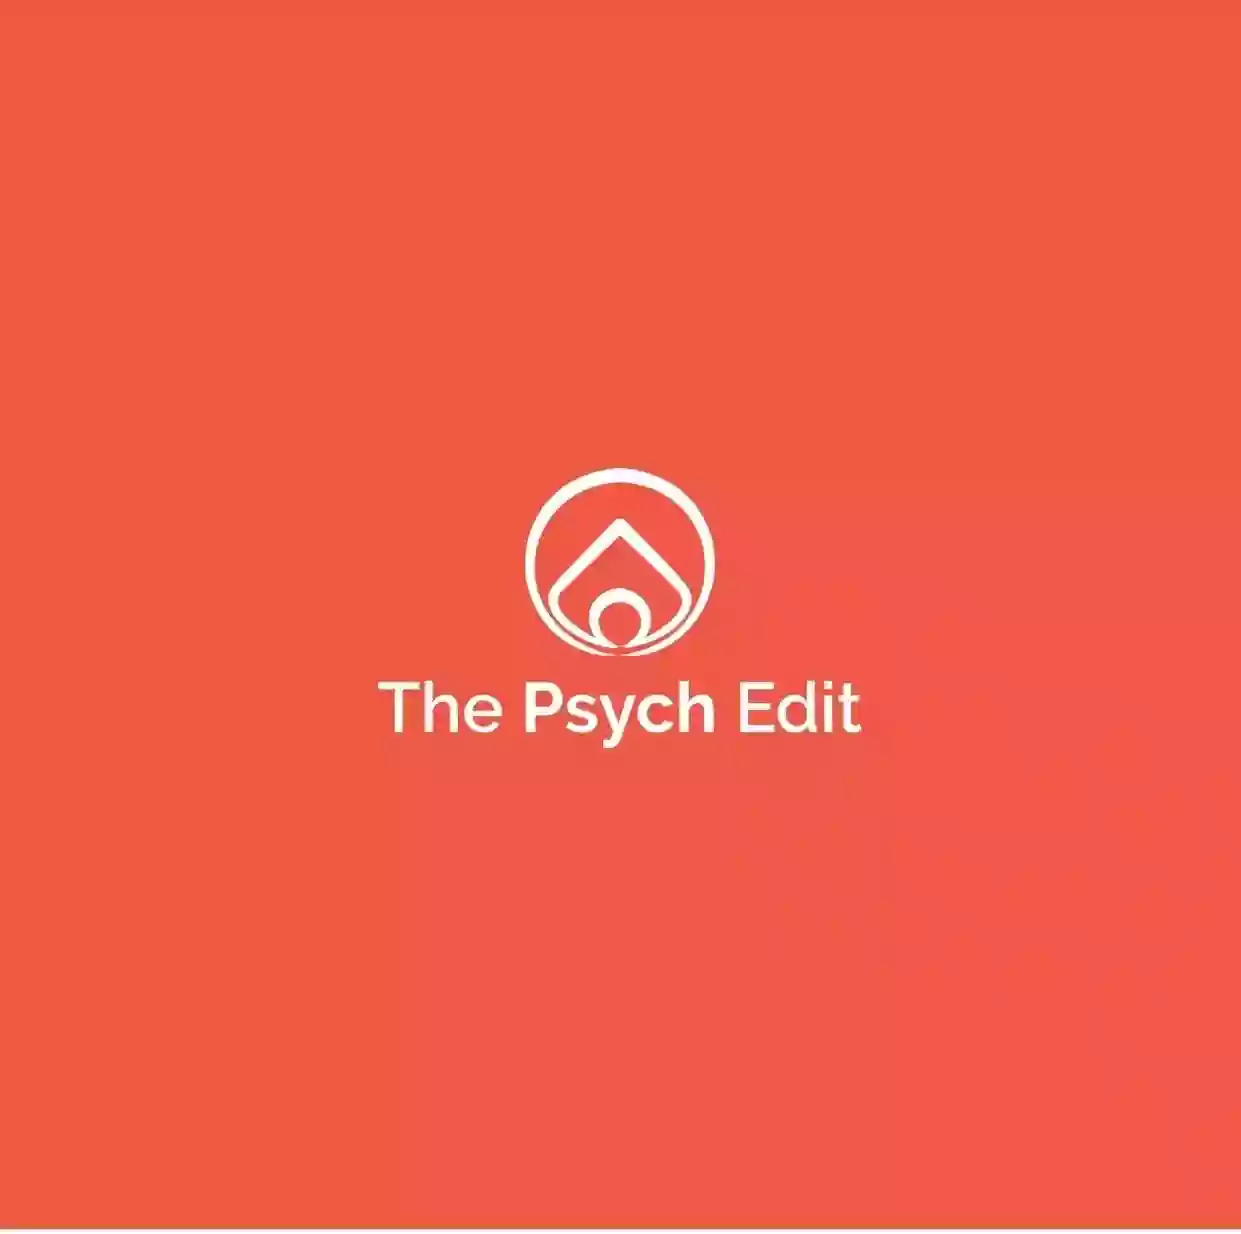 The Psych Edit